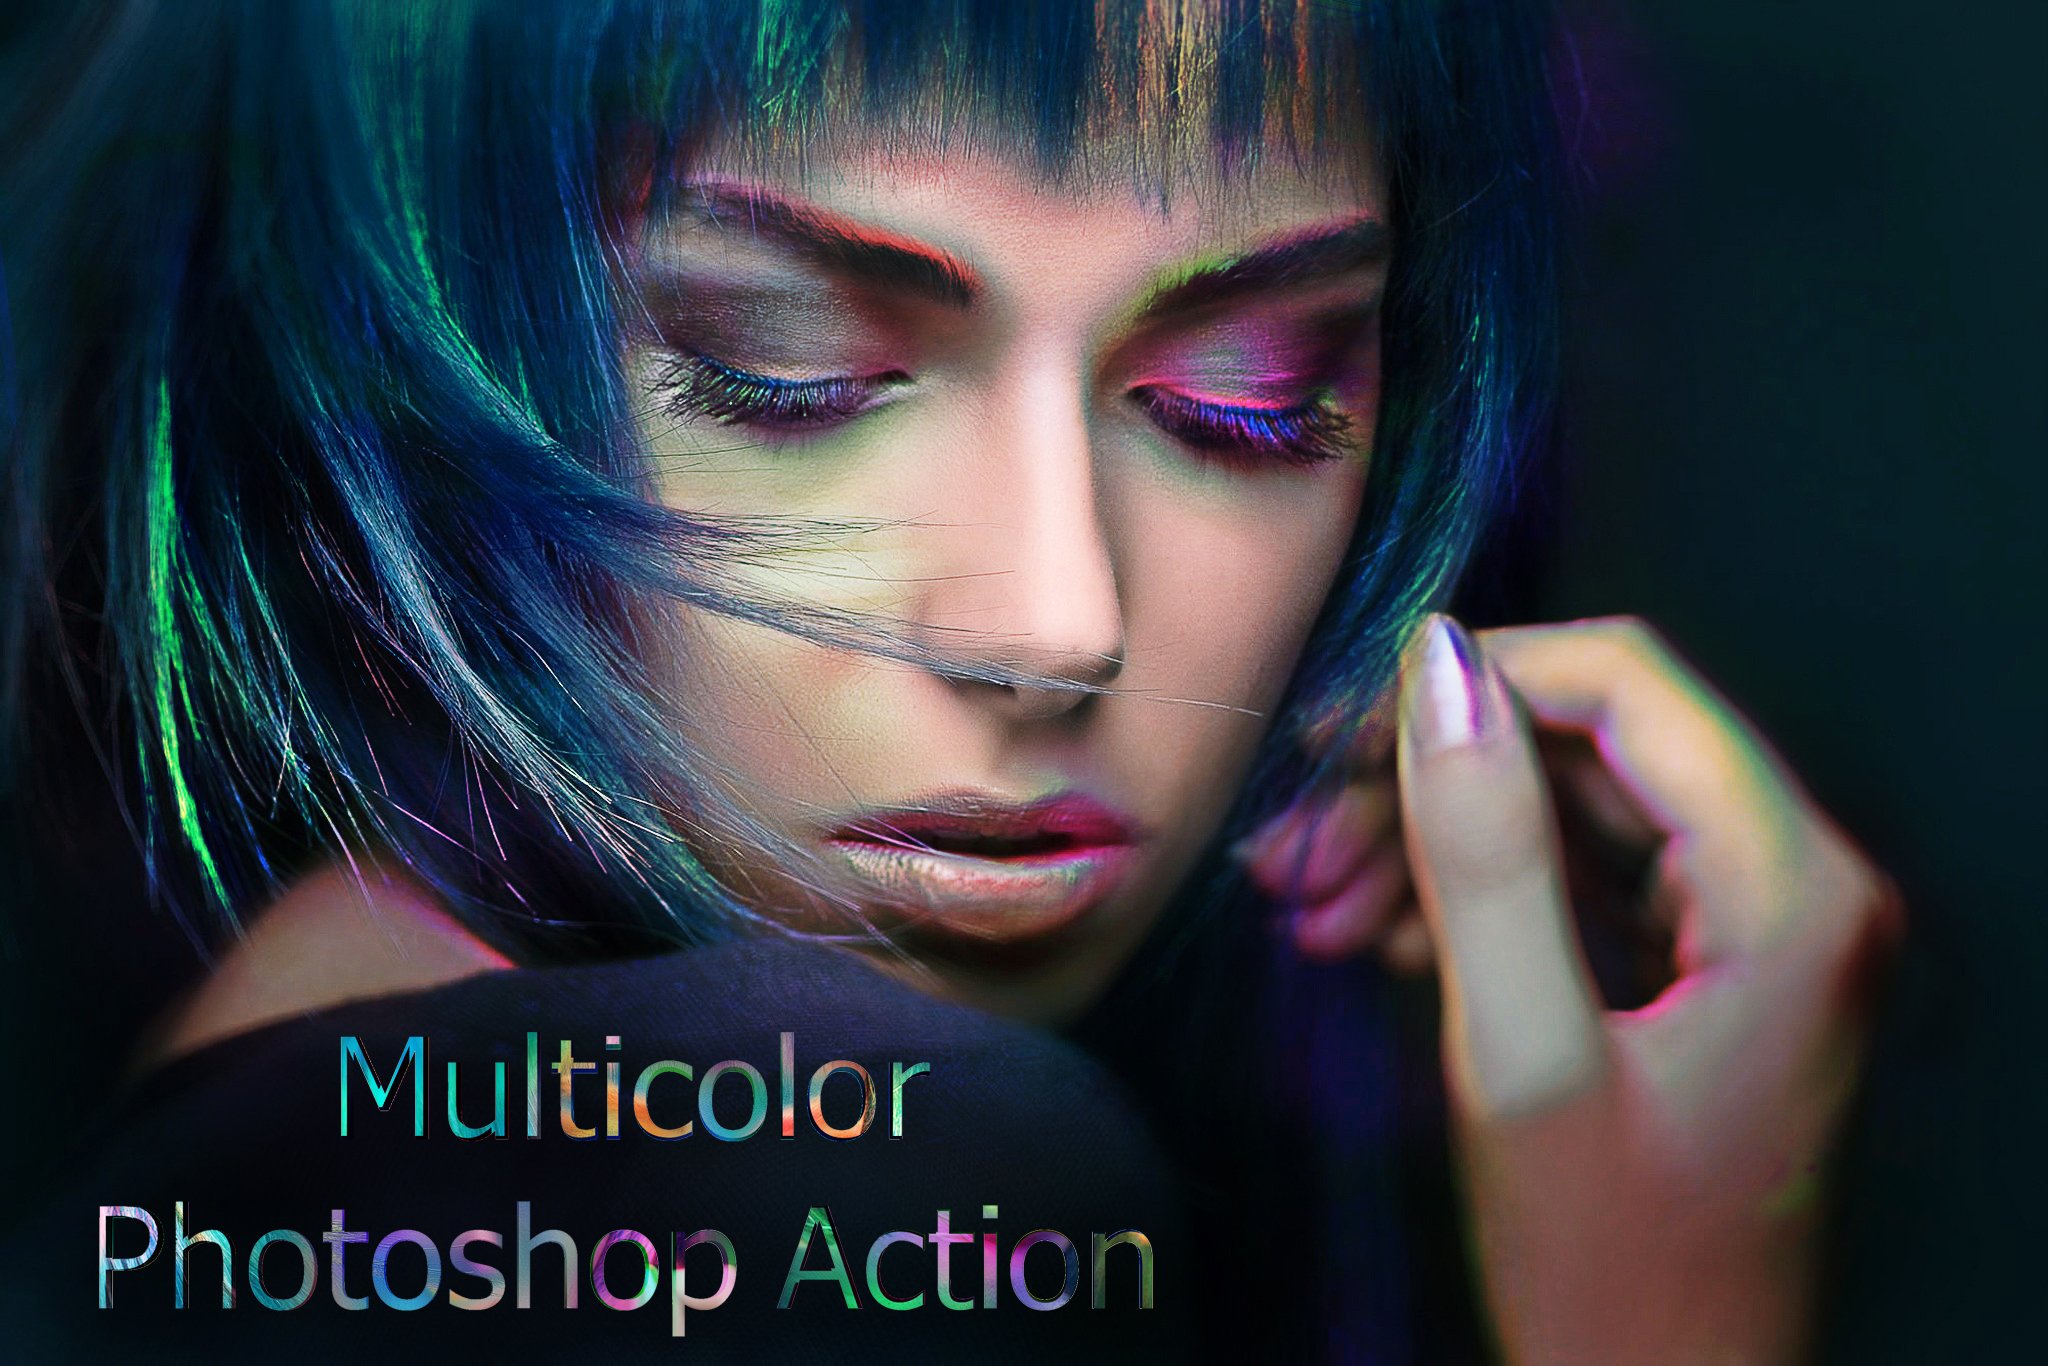 Multicolor Photoshop Actioncover image.